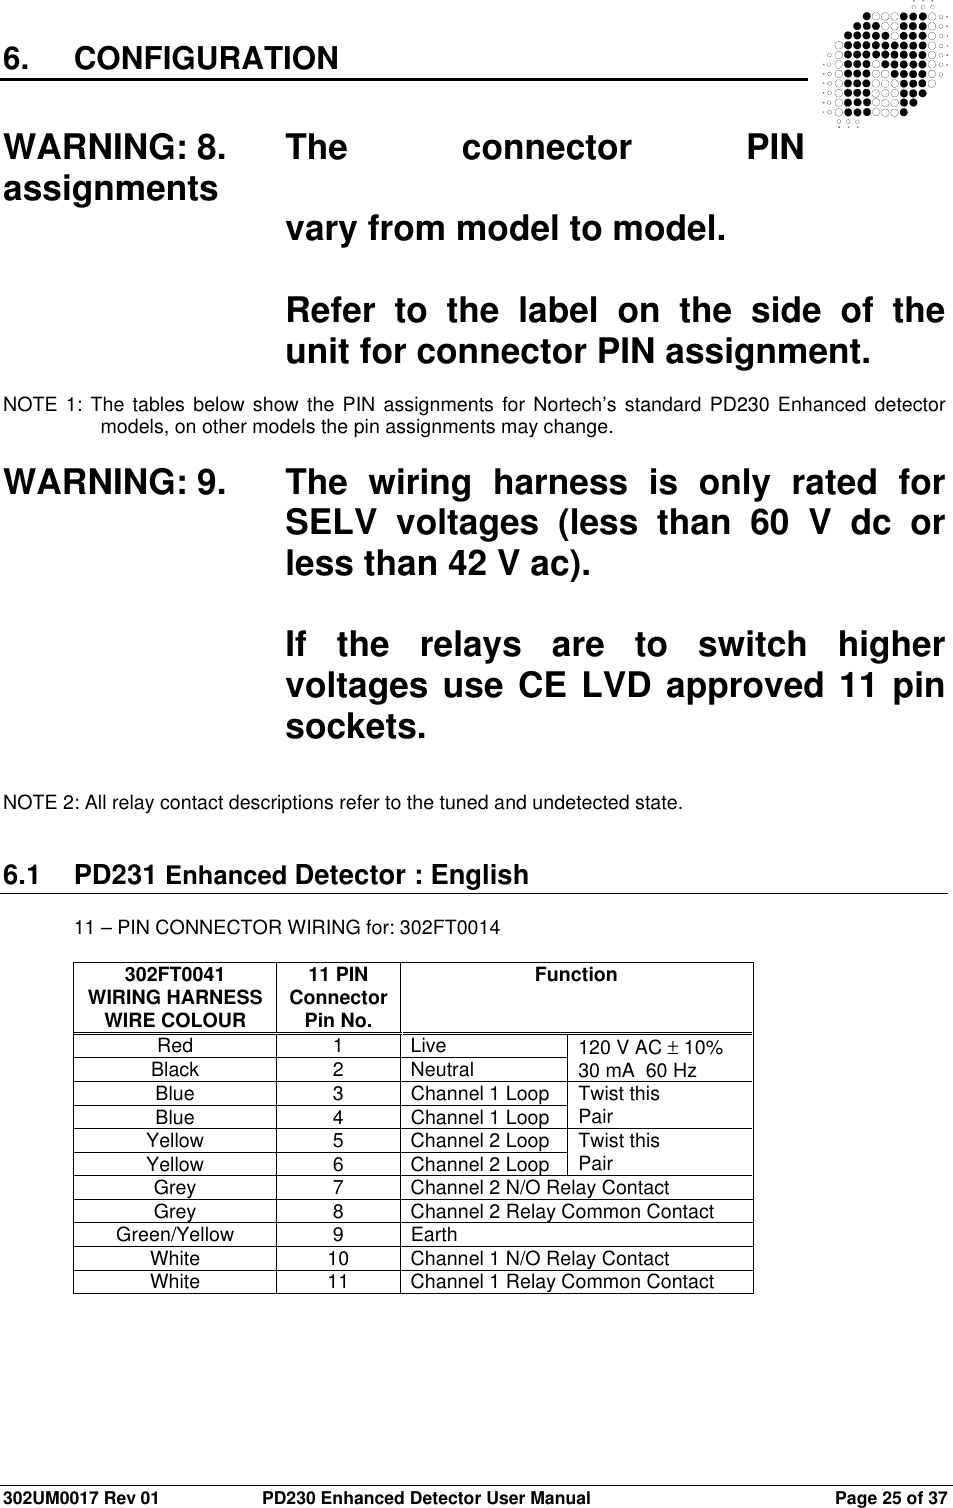  302UM0017 Rev 01  PD230 Enhanced Detector User Manual   Page 25 of 37 6.  CONFIGURATION   WARNING: 8.  The  connector  PIN assignments   vary from model to model.  Refer  to  the  label  on  the  side  of  the unit for connector PIN assignment.  NOTE 1:  The tables  below show  the PIN assignments for Nortech’s standard PD230  Enhanced detector models, on other models the pin assignments may change.  WARNING: 9.  The  wiring  harness  is  only  rated  for SELV  voltages  (less  than  60  V  dc  or less than 42 V ac).    If  the  relays  are  to  switch  higher voltages use CE LVD approved 11 pin sockets.   NOTE 2: All relay contact descriptions refer to the tuned and undetected state.   6.1  PD231 Enhanced Detector : English  11 – PIN CONNECTOR WIRING for: 302FT0014  302FT0041 WIRING HARNESS WIRE COLOUR  11 PIN Connector Pin No. Function Red  1  Live          Black  2  Neutral  120 V AC ± 10% 30 mA  60 Hz Blue  3  Channel 1 Loop Blue  4  Channel 1 Loop  Twist this  Pair Yellow  5  Channel 2 Loop Yellow  6  Channel 2 Loop  Twist this Pair Grey  7  Channel 2 N/O Relay Contact Grey  8  Channel 2 Relay Common Contact Green/Yellow  9  Earth White  10  Channel 1 N/O Relay Contact White  11  Channel 1 Relay Common Contact        